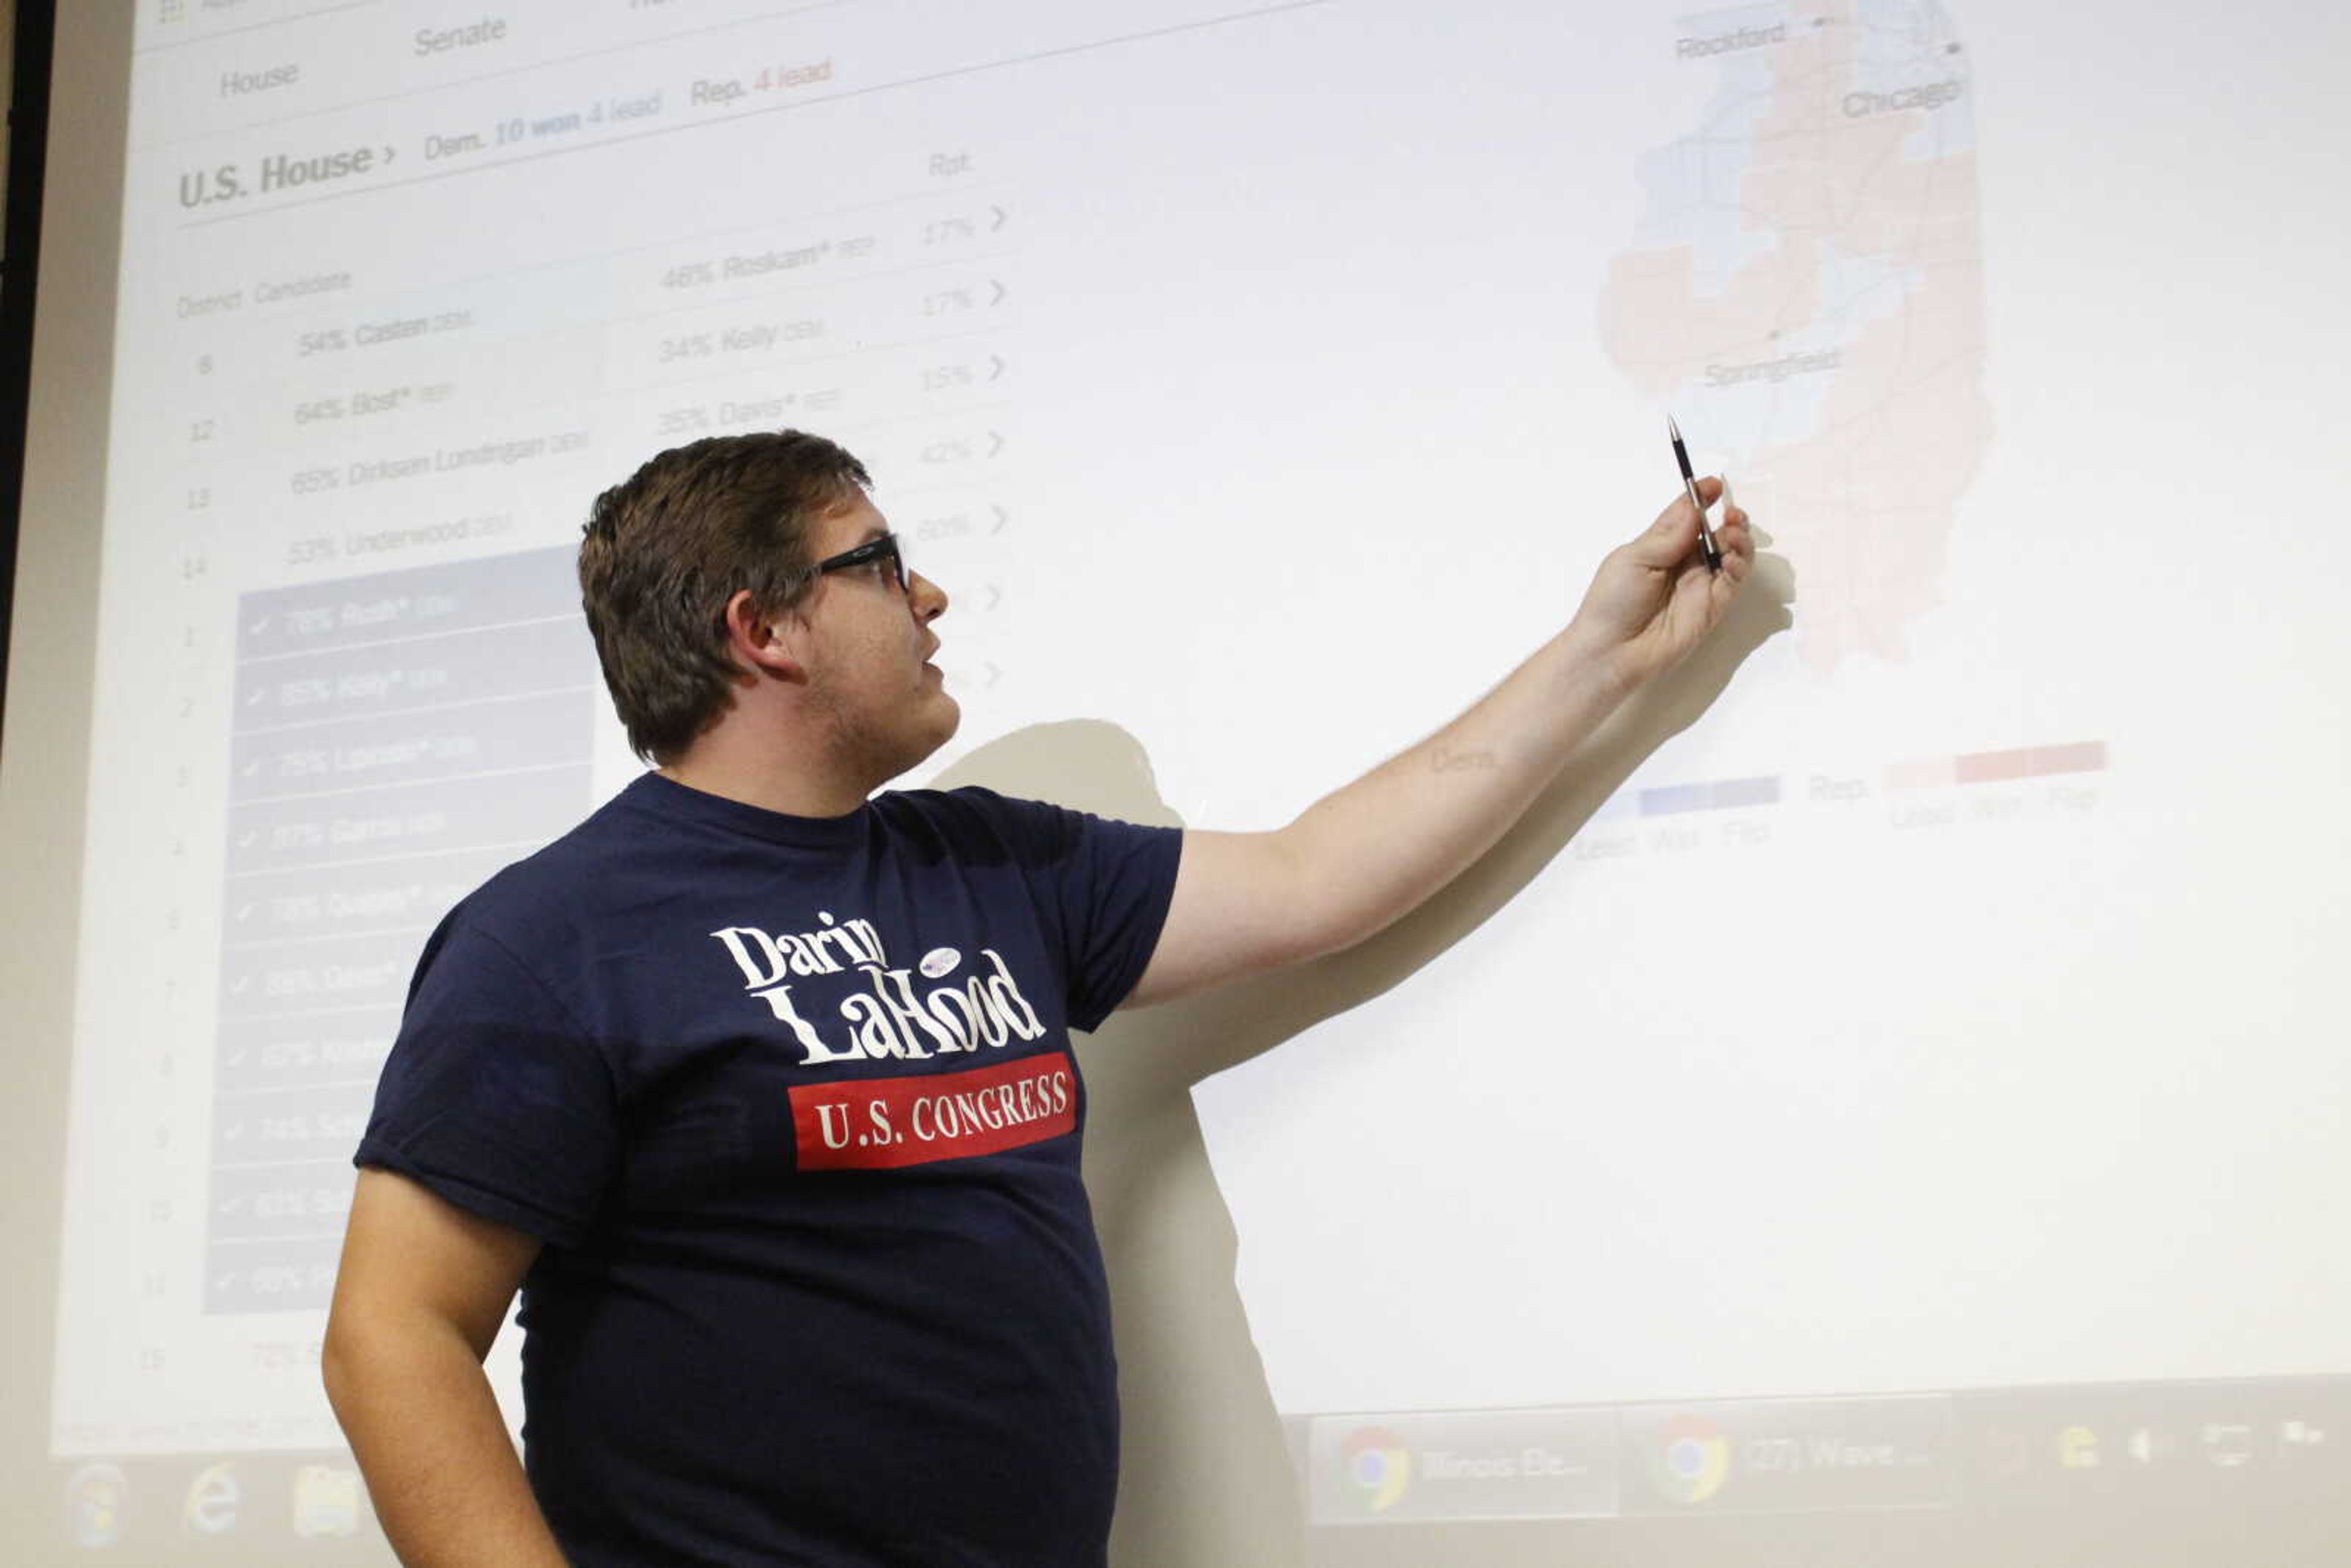 College Republicans “geek out” on election night